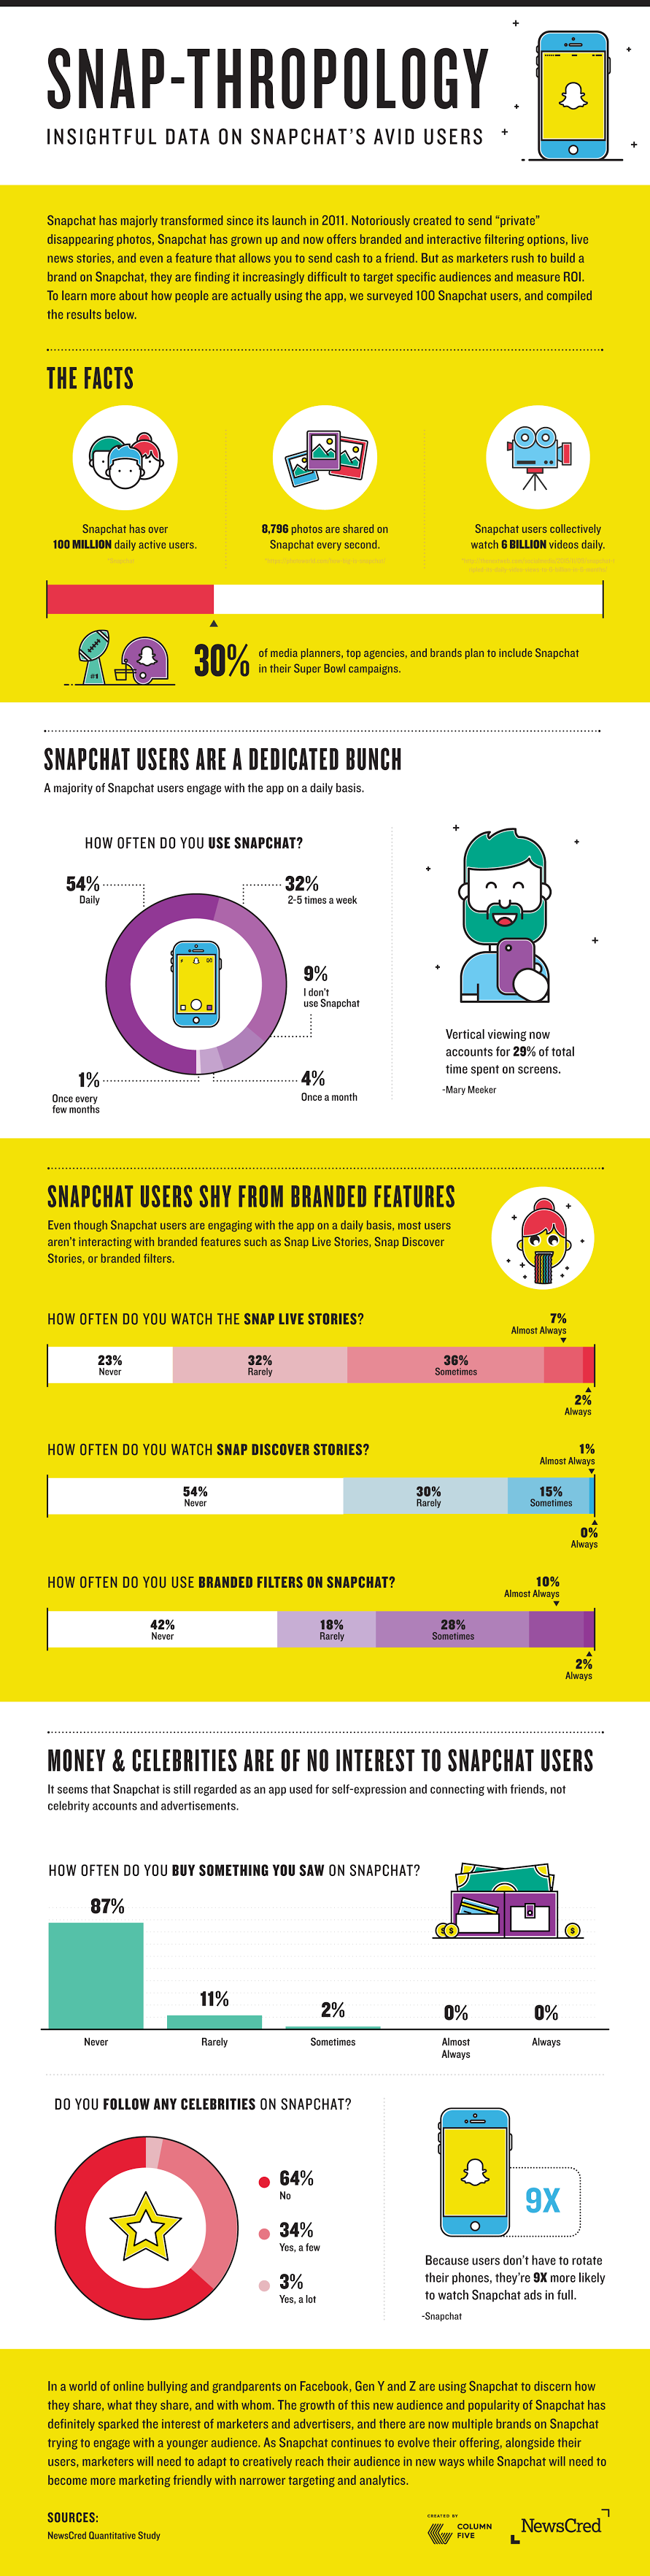 How consumers are really using Snapchat